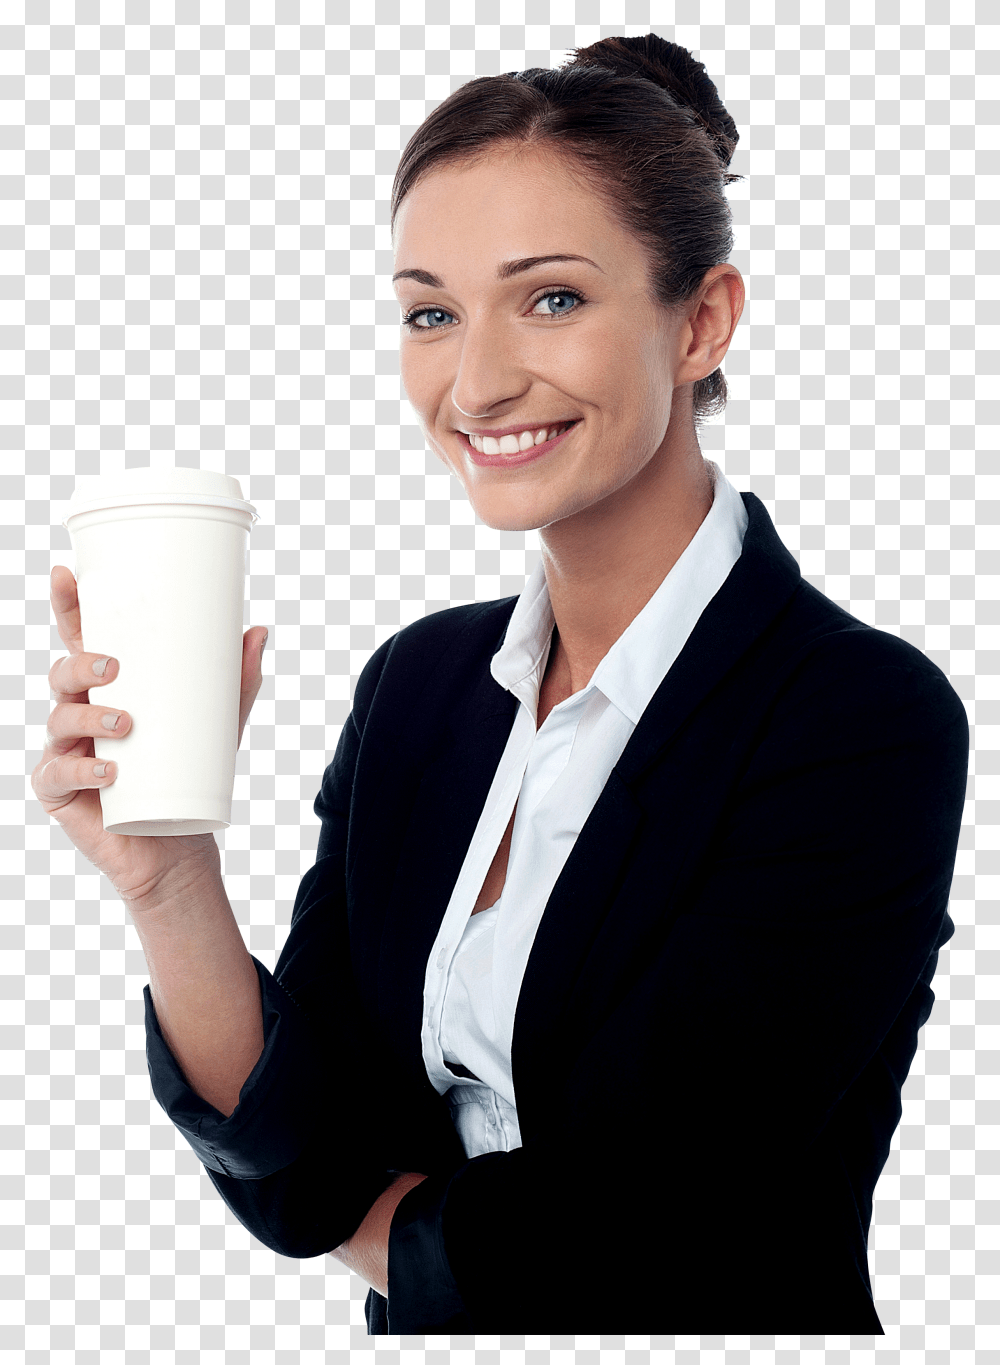 Business Women Royalty Free Image Business Women Transparent Png